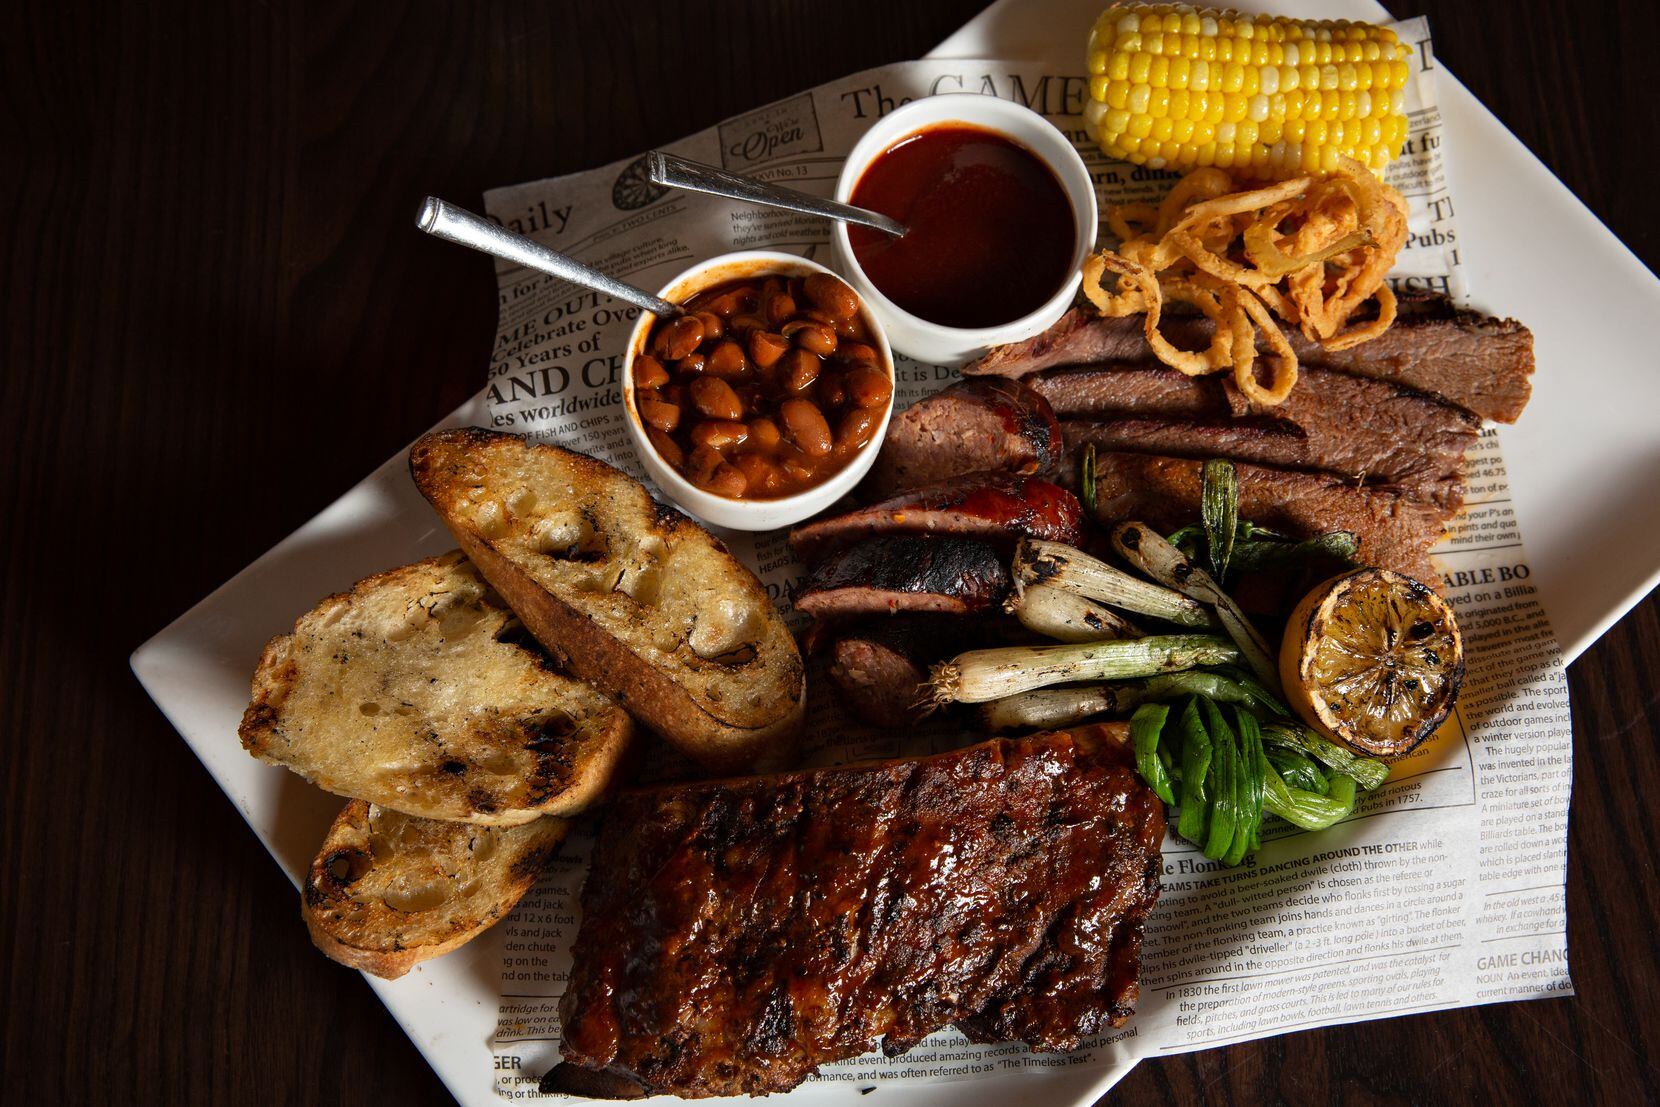 Jasper's barbecue sampler with slow smoked baby back ribs, brisket, sausage, baked beans and...